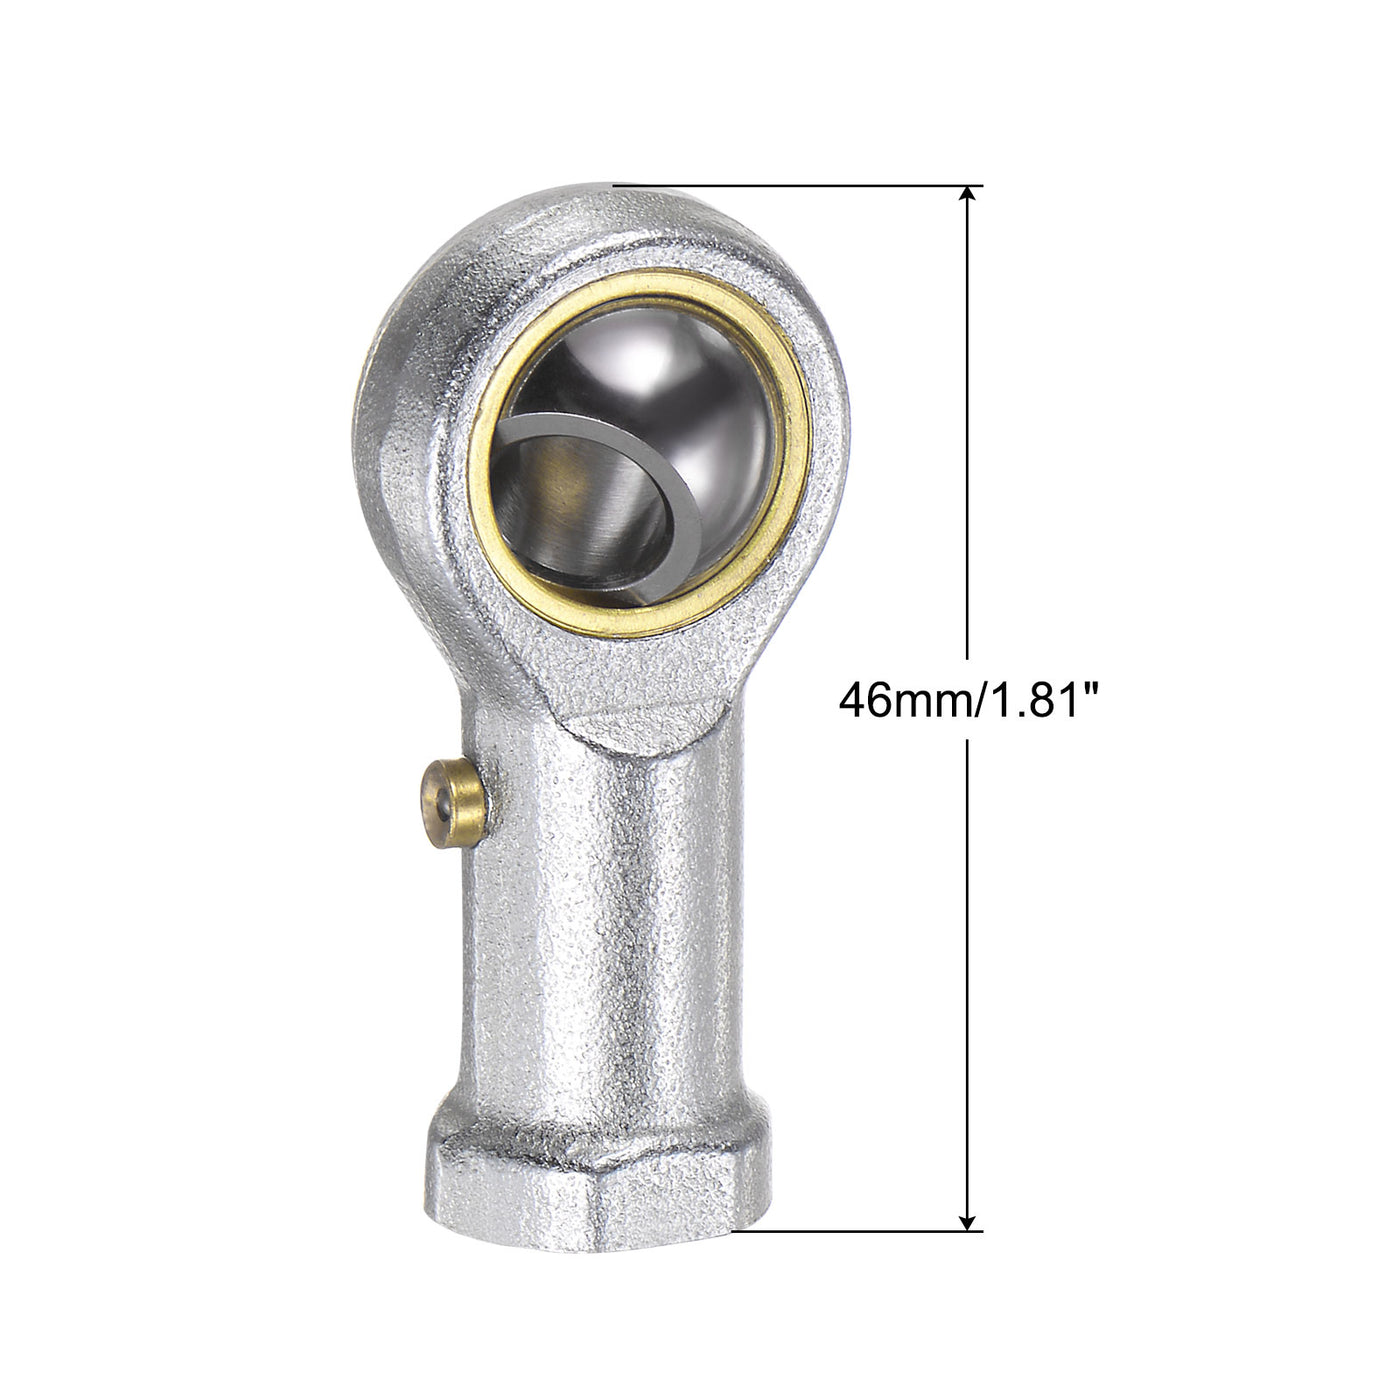 uxcell Uxcell PHSB5 Female Rod End 5/16" Bore and 5/16-24 Right Hand Thread,Includes Jam Nut